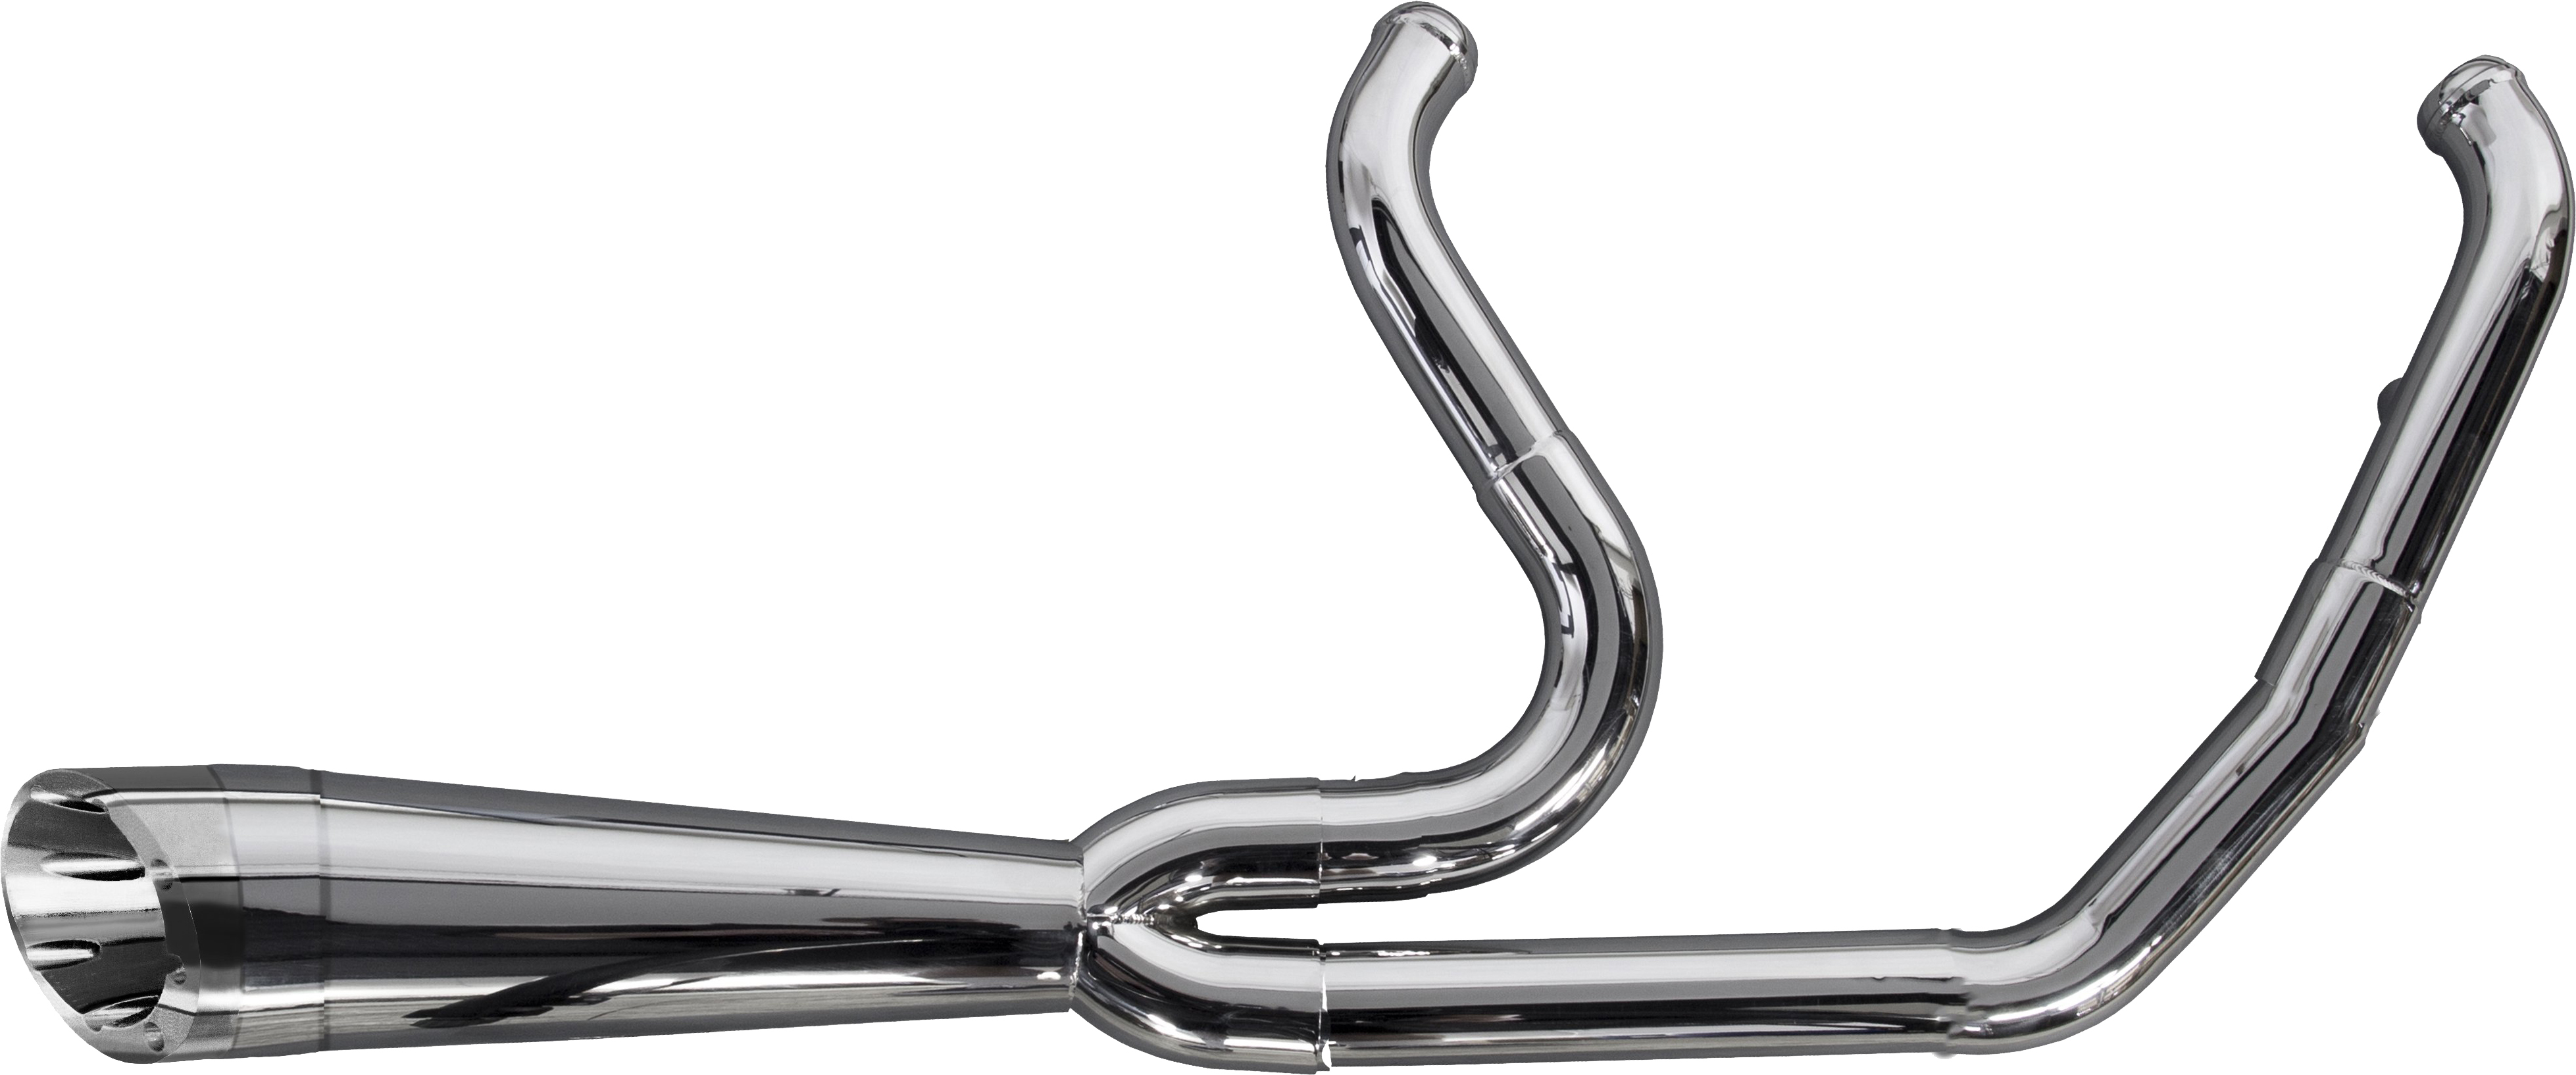 2-1 Comp-S Polished Turnout Full Exhaust - For 18-20 HD Softail - Click Image to Close